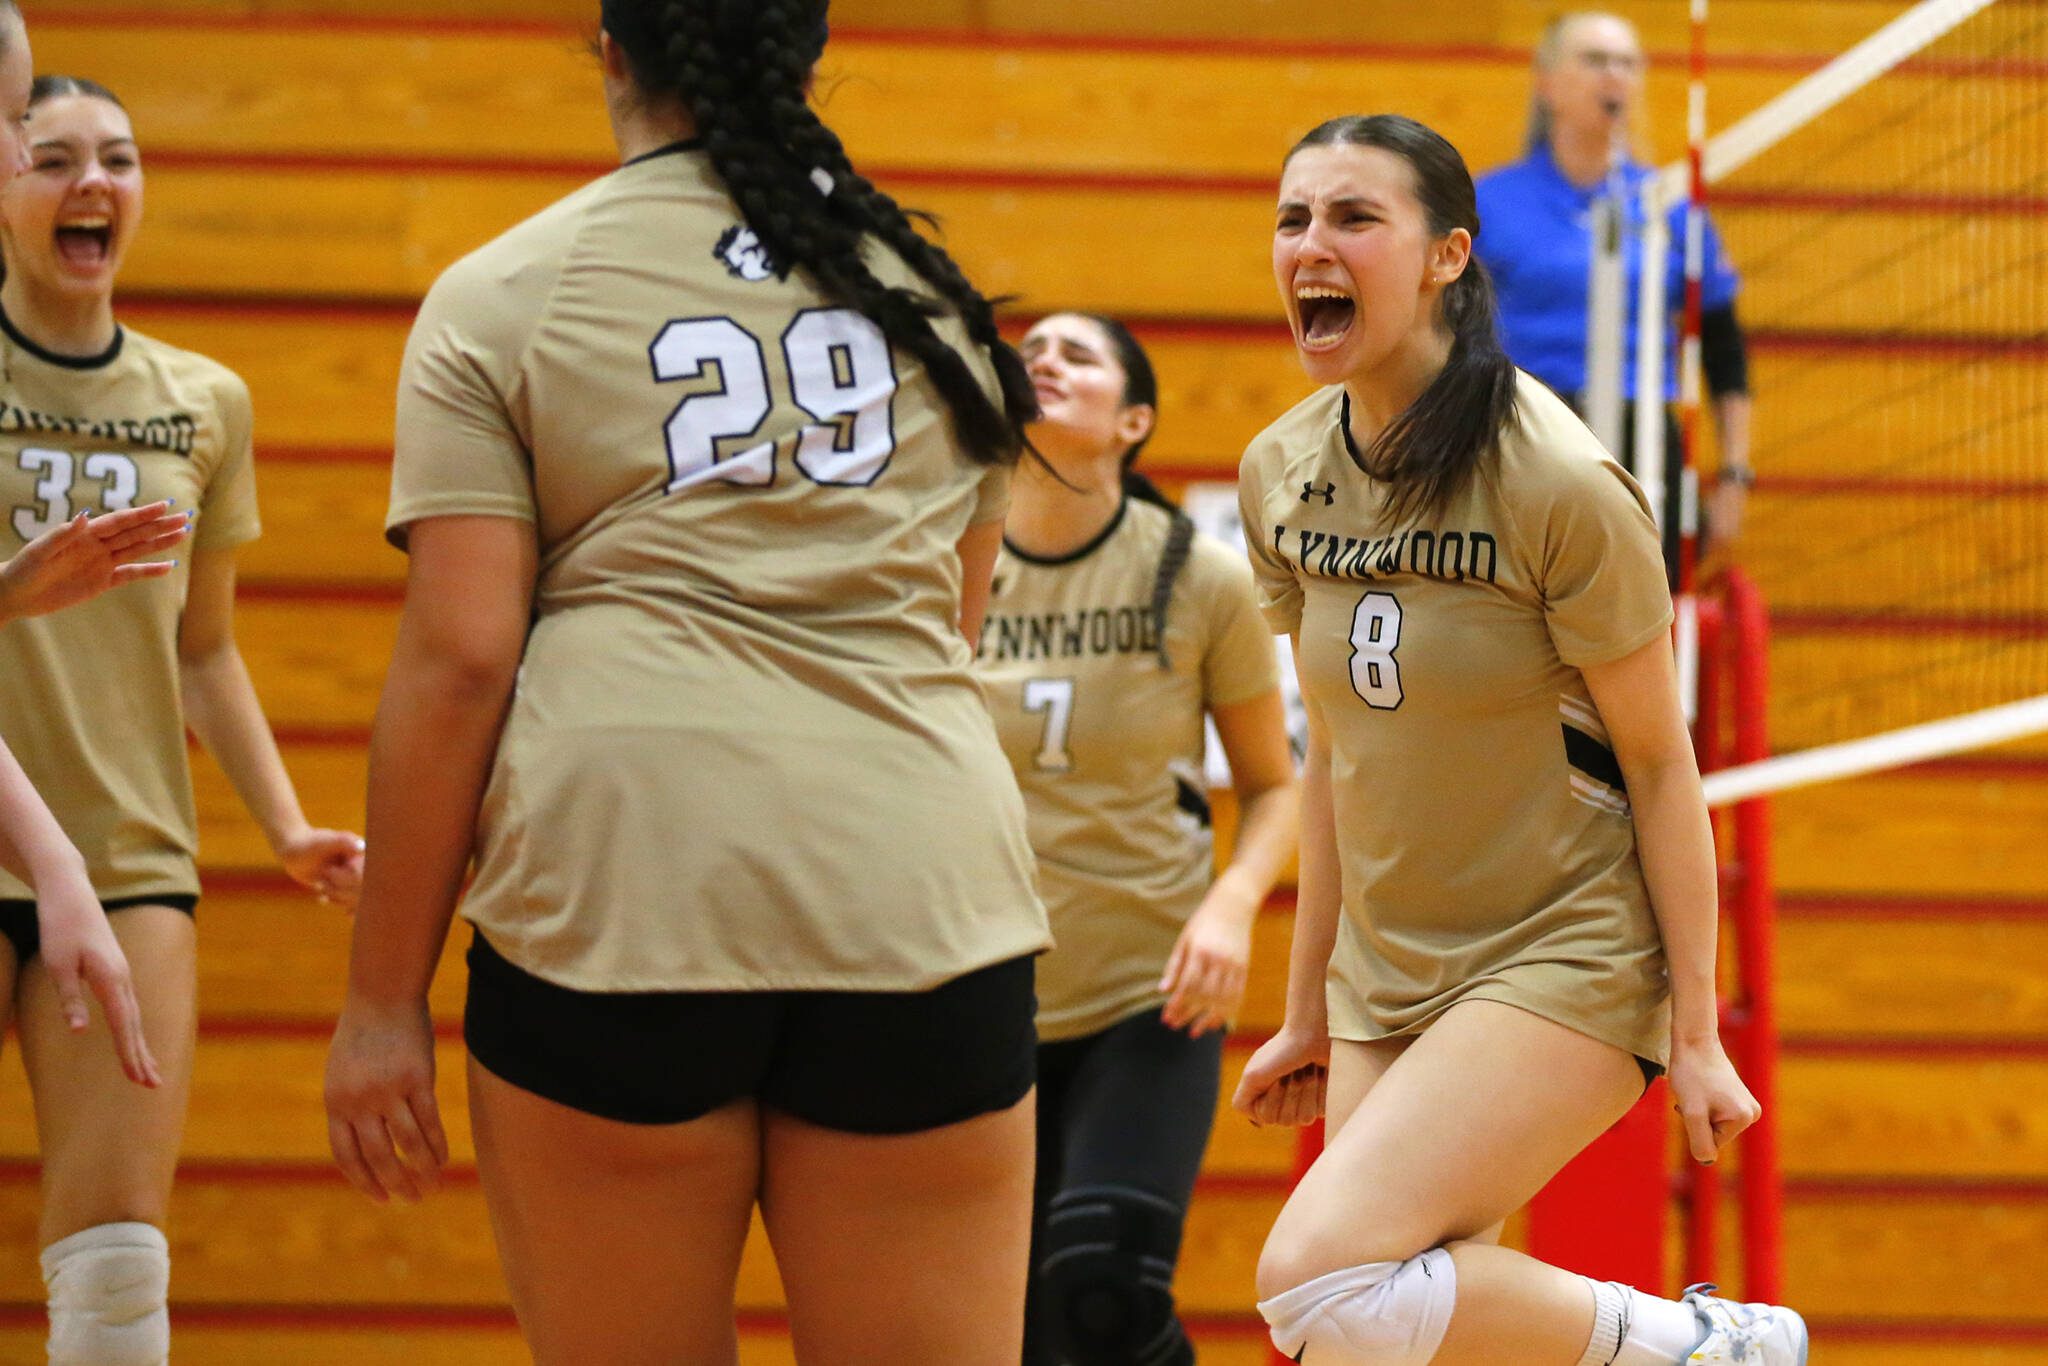 Lynnwood’s Ady Martin, right, celebrates with her teammates during a Class 3A District 1 tournament semifinal match against Shorecrest on Nov. 9 at Marysville Pilchuck High School in Marysville. The Royals hold the No. 2 seed in the 3A state tournament. (Ryan Berry / The Herald)